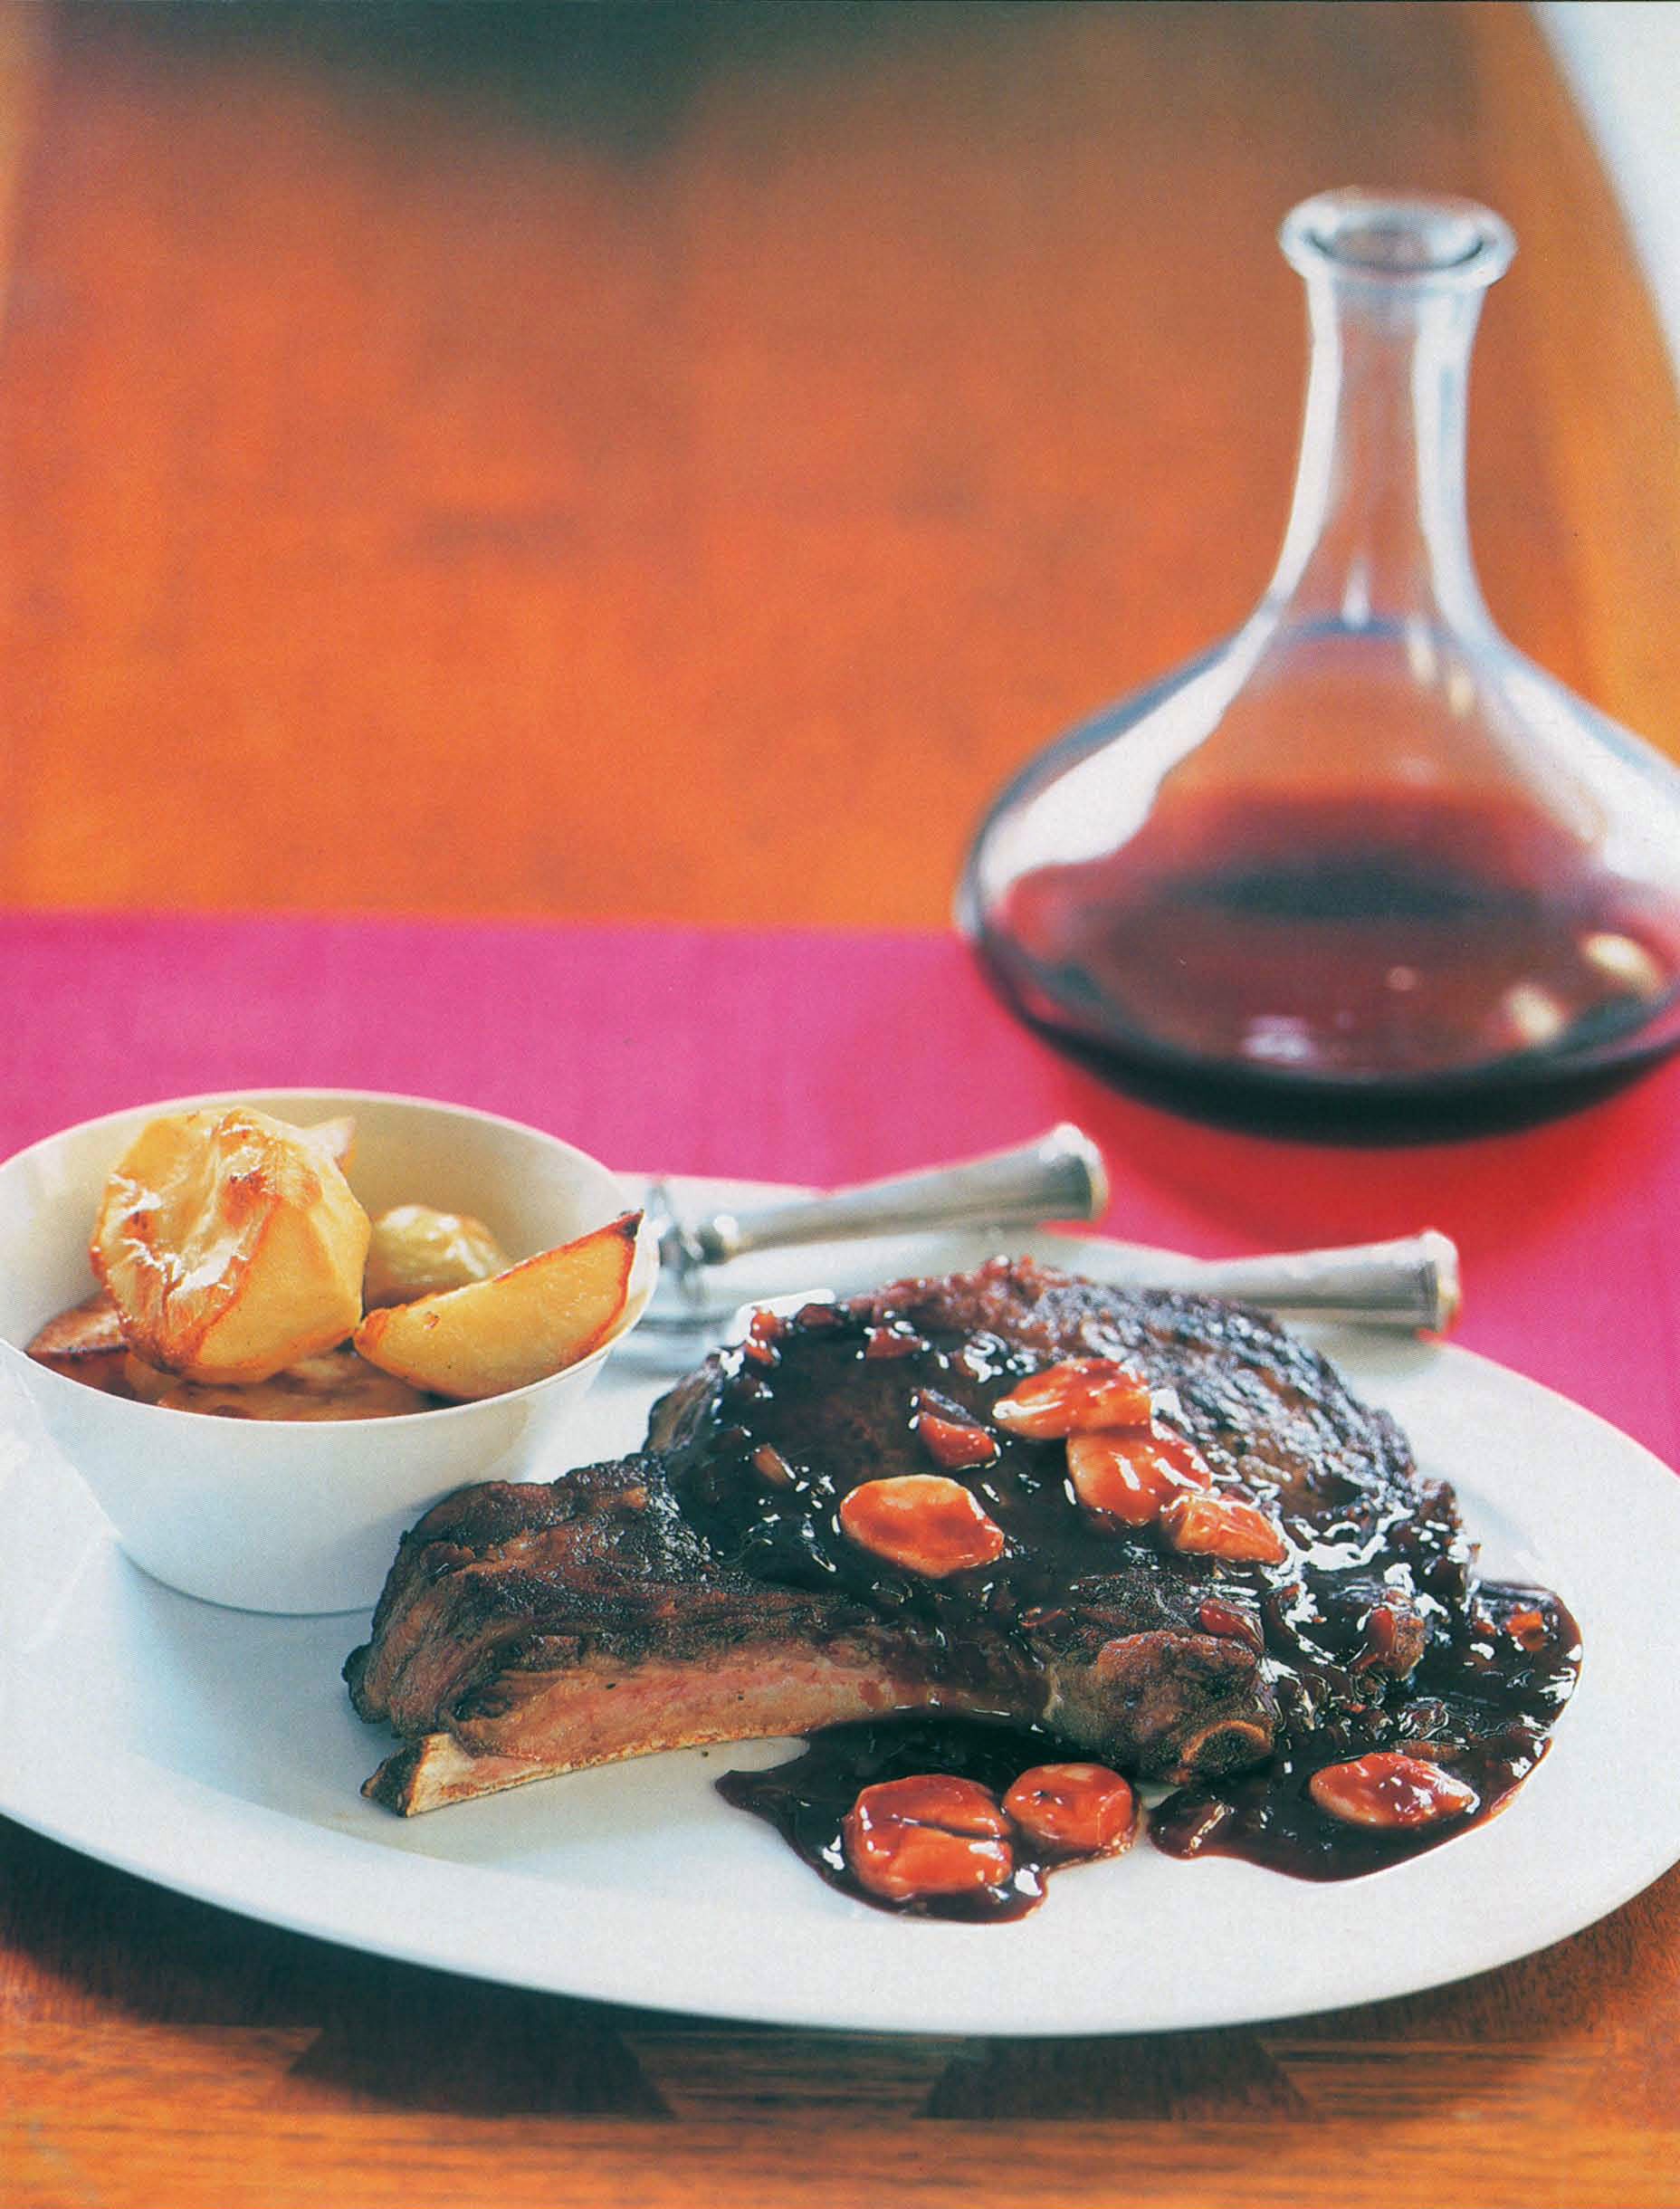 Steak With Bordelaise Sauce From Glorious French Food By James Peterson,Inexpensive Kitchen Cabinets And Countertops